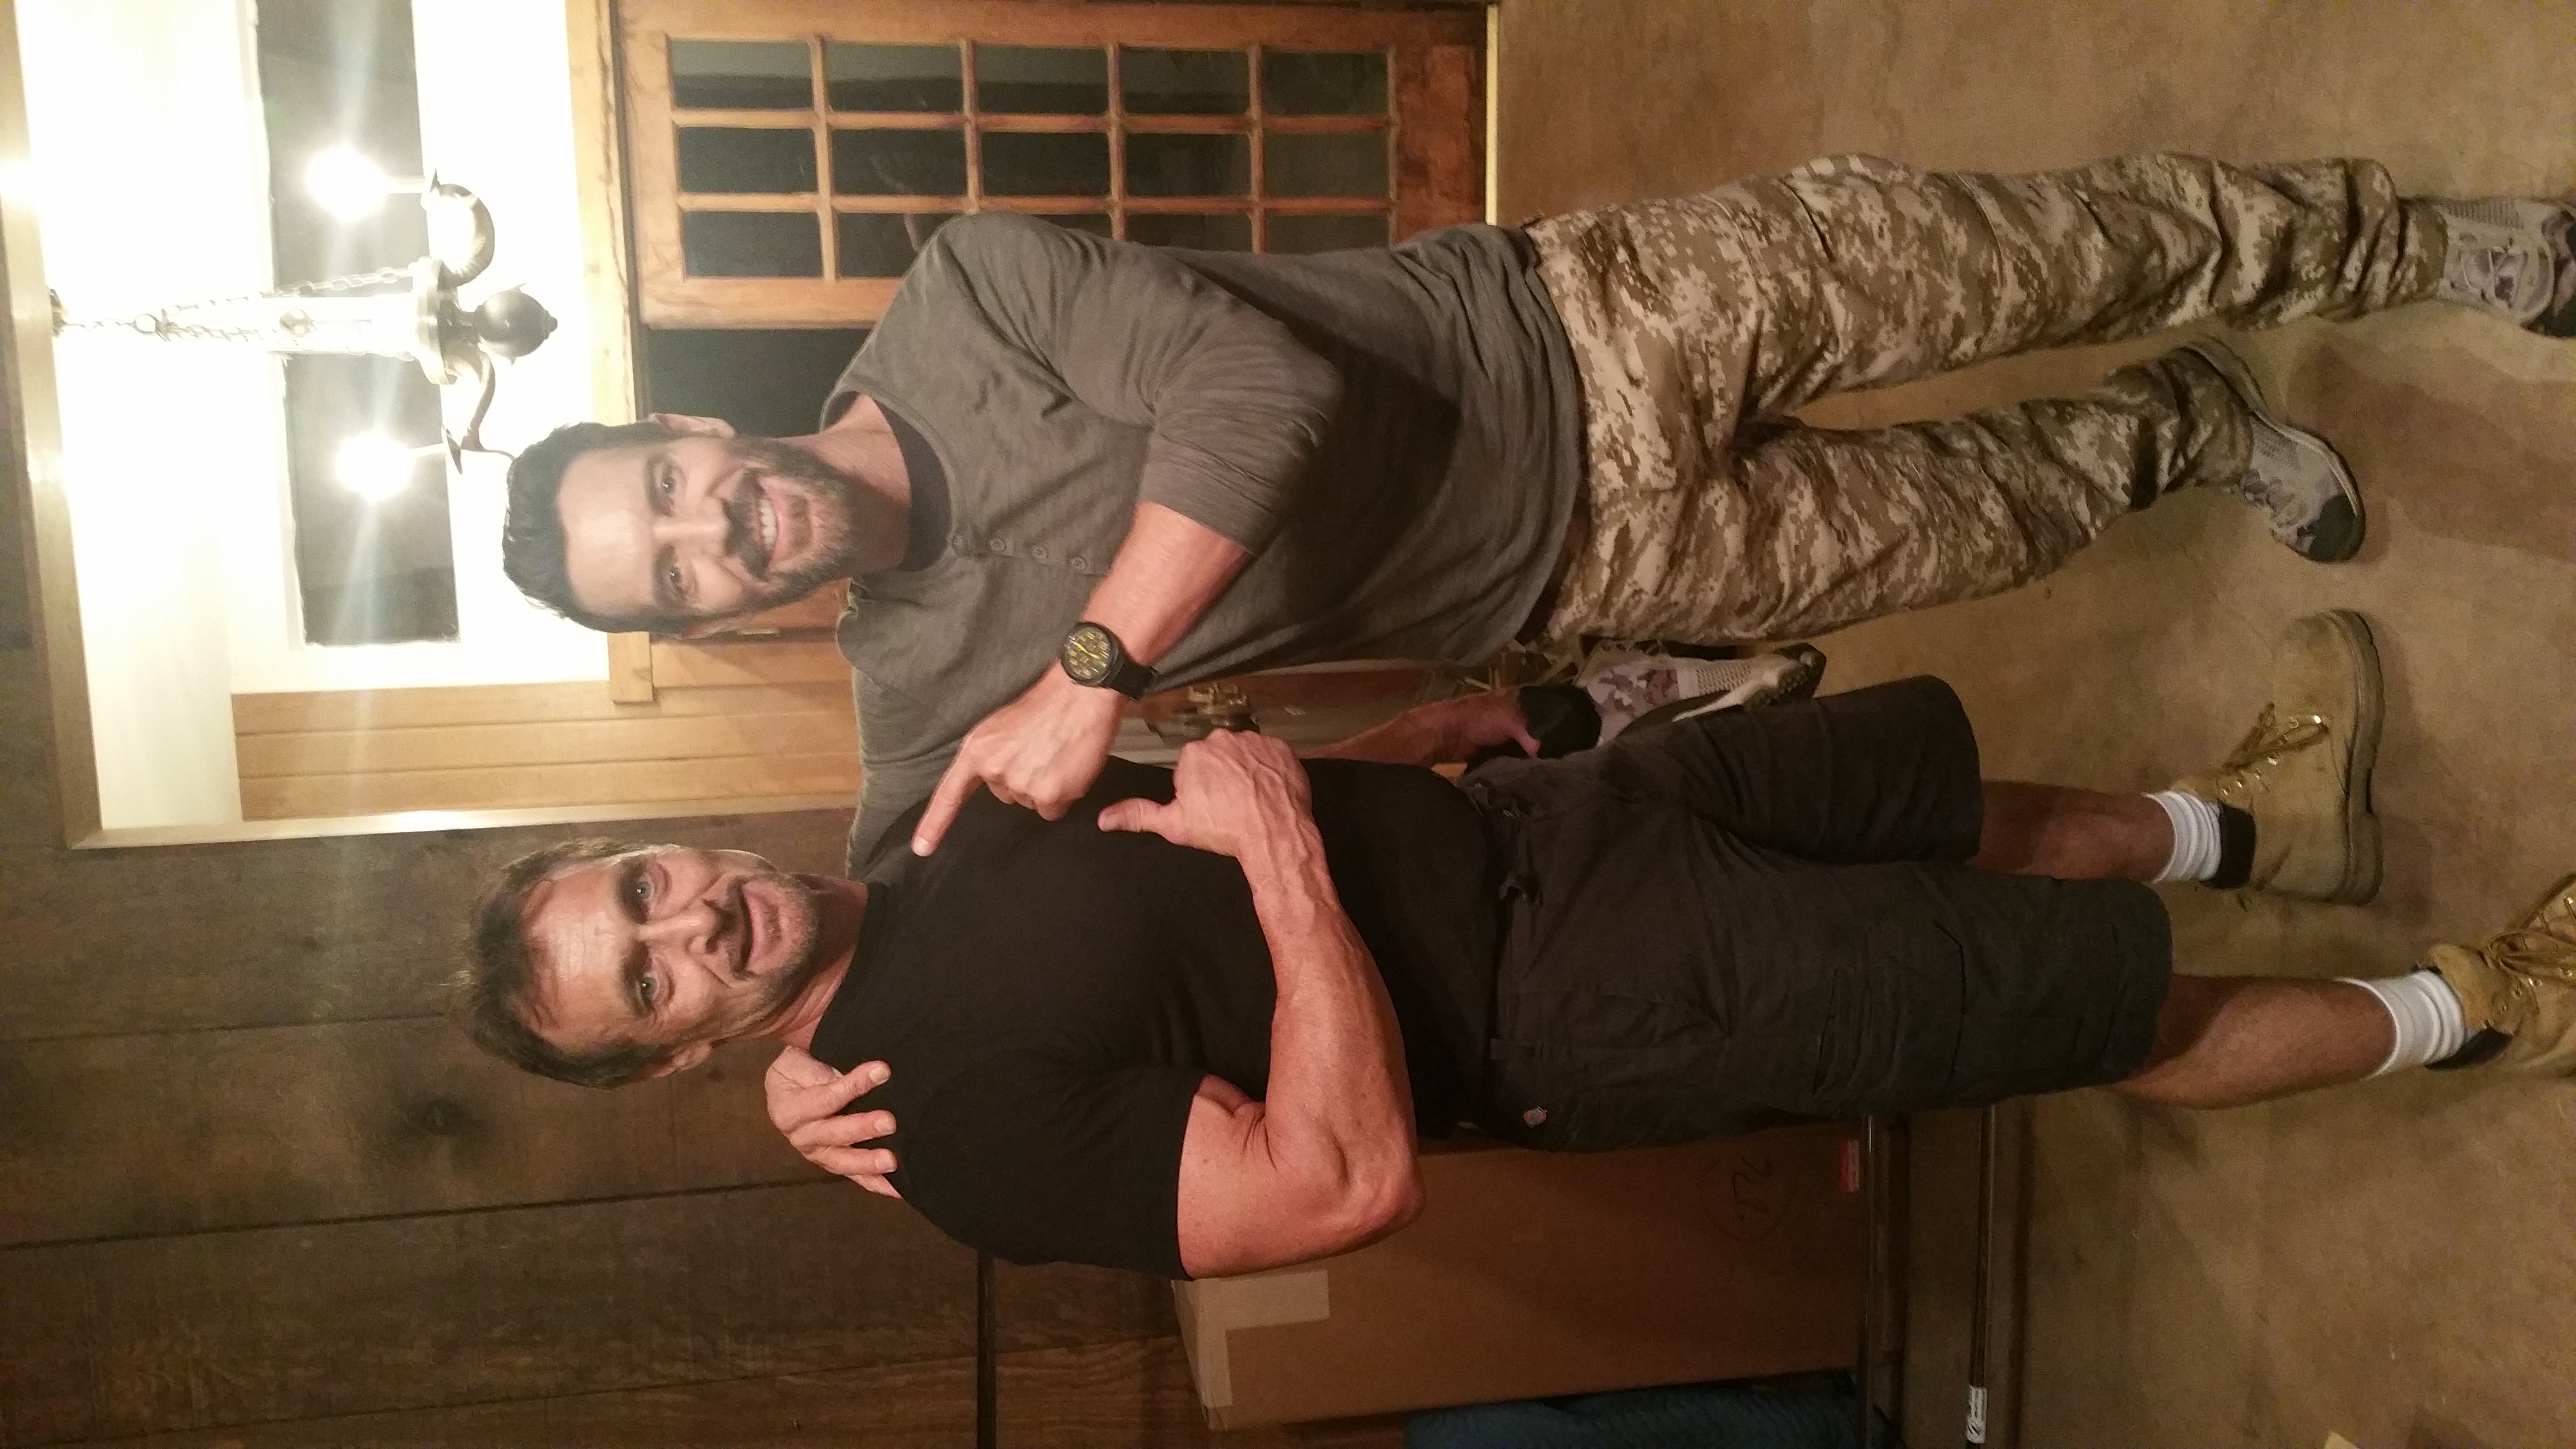 With Tony Horton after appearing in a new p90x to come out later this year.